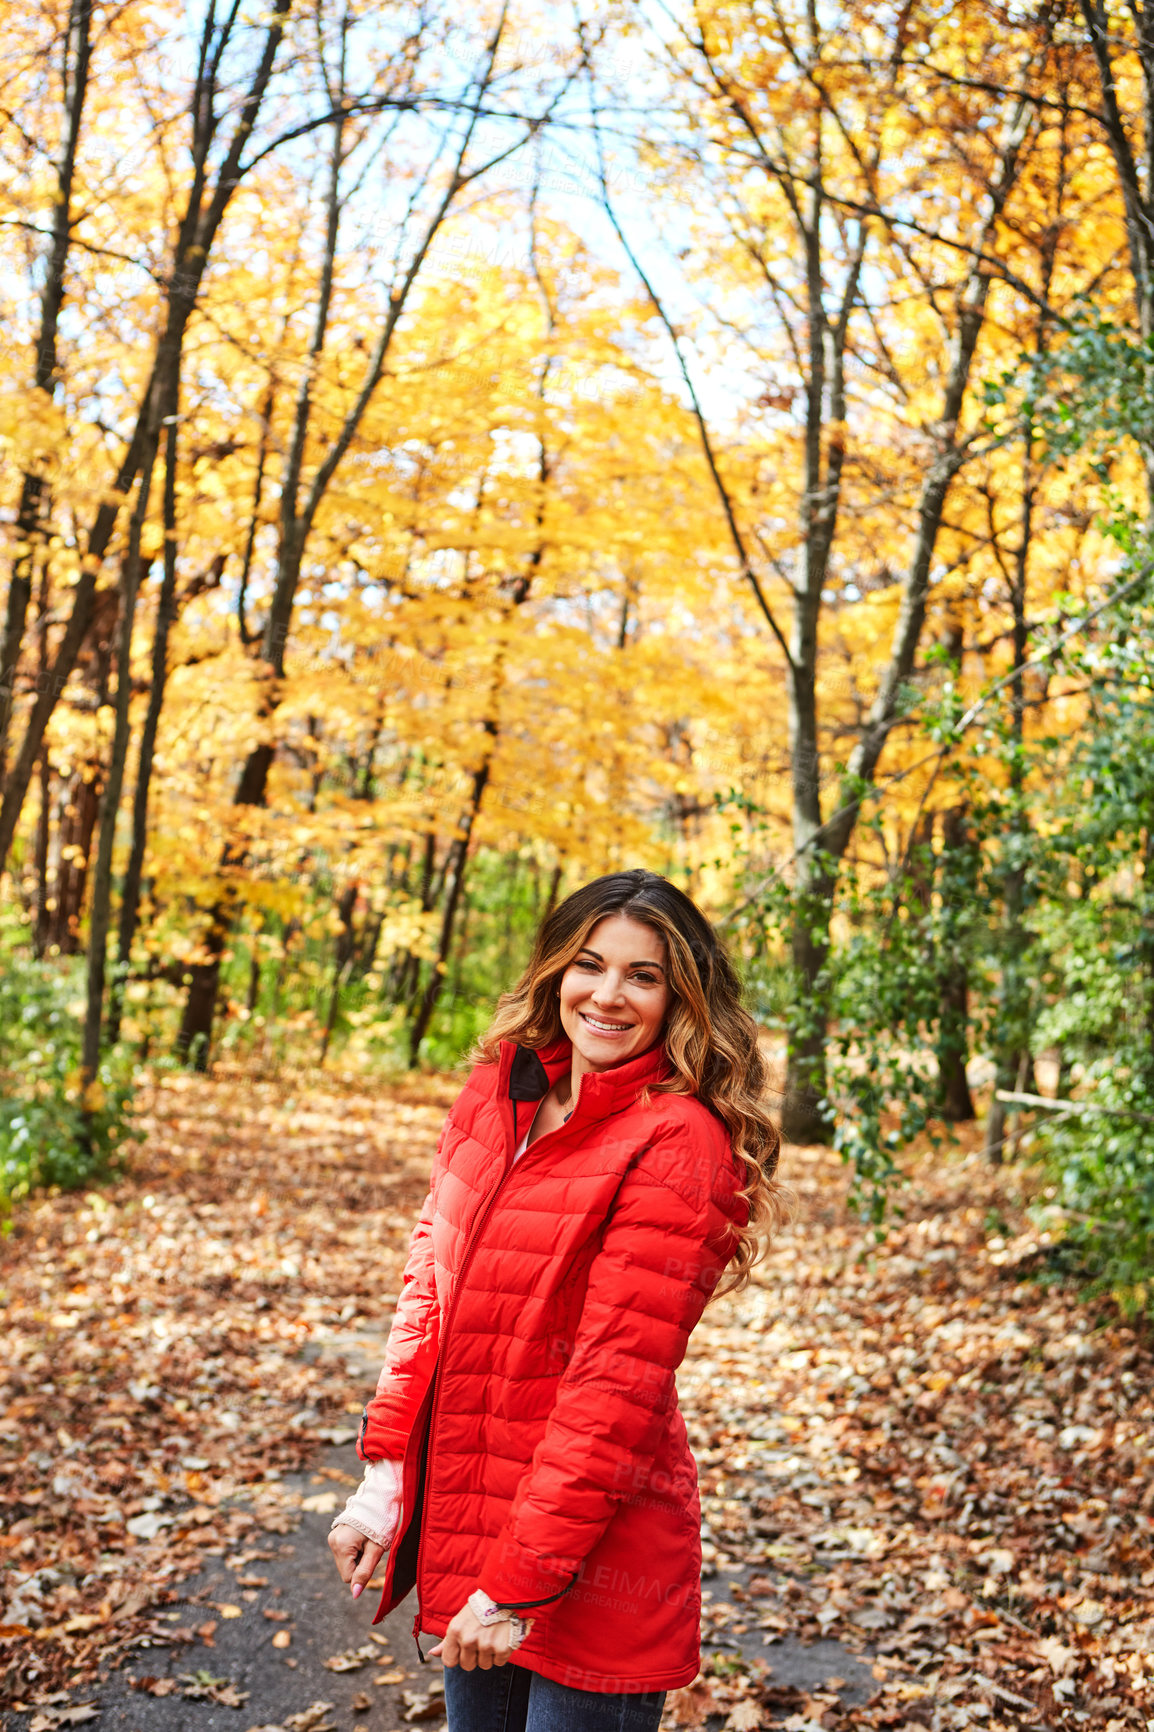 Buy stock photo Cropped portrait of an attractive young woman in the forest during autumn